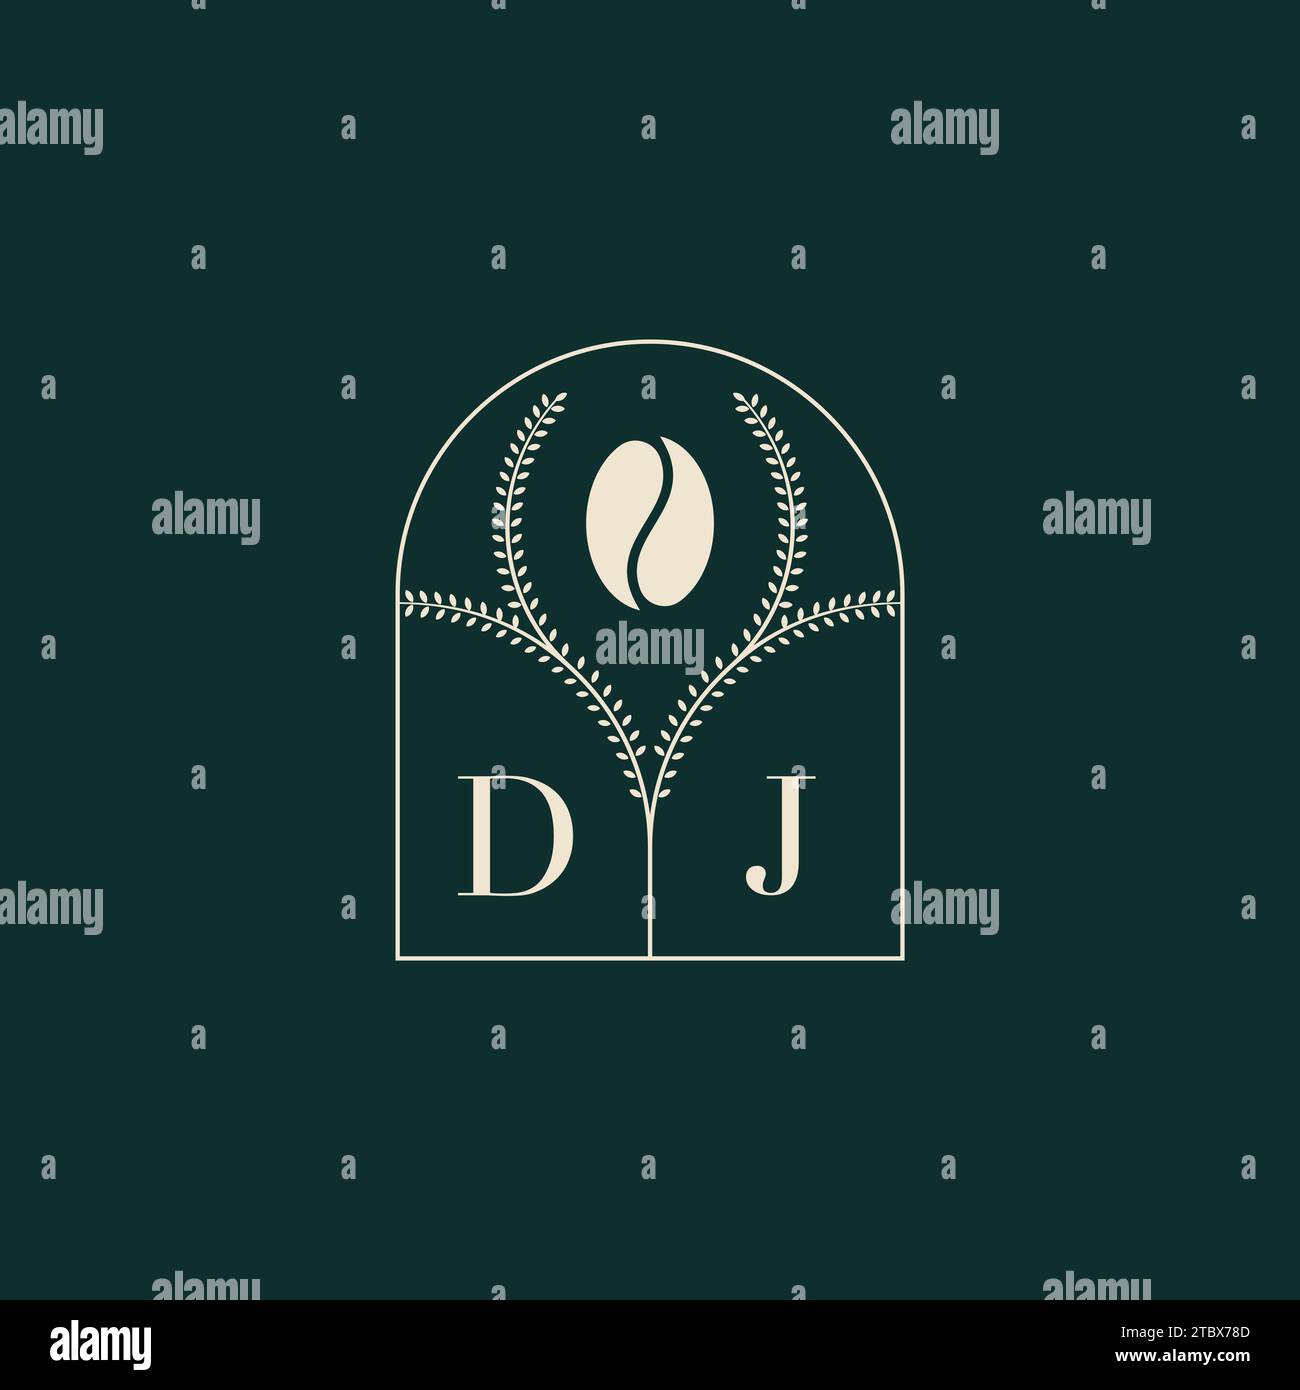 DJ Unique and simple logo design combination of letters and coffee bean Stock Vector